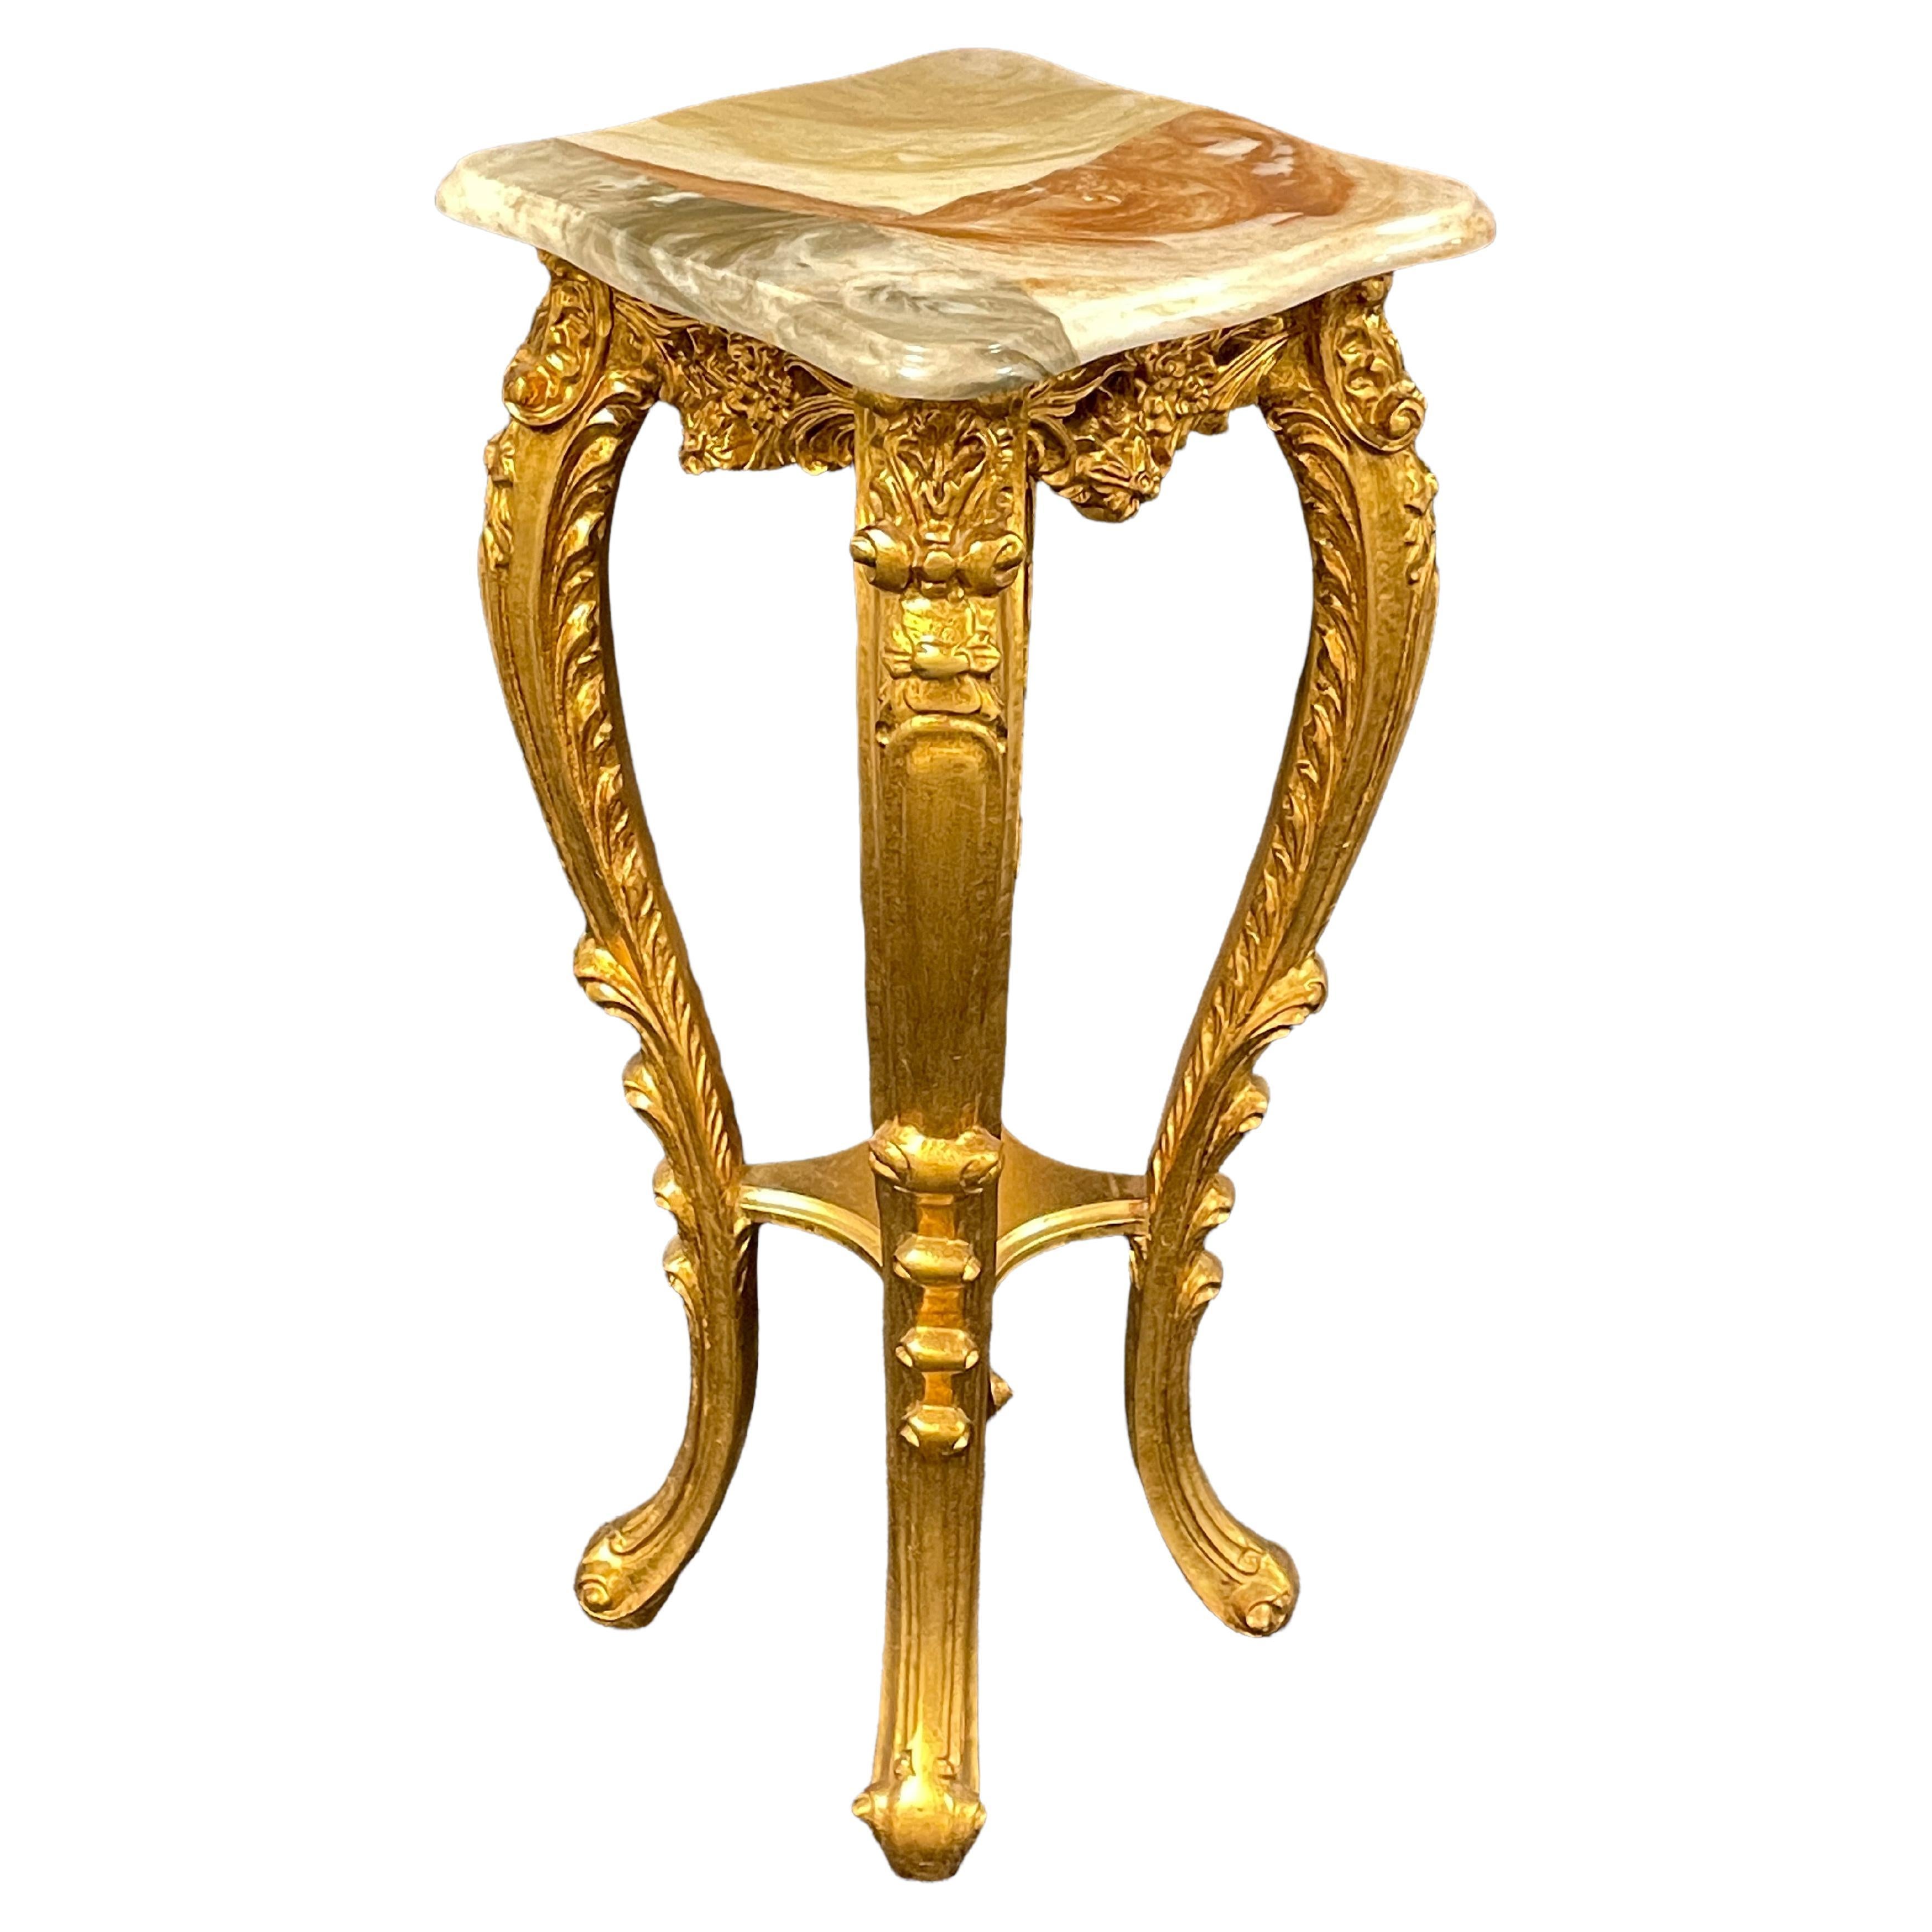 20th Century Carved Gilt Wood Toleware Console Pedestal Table, Italy